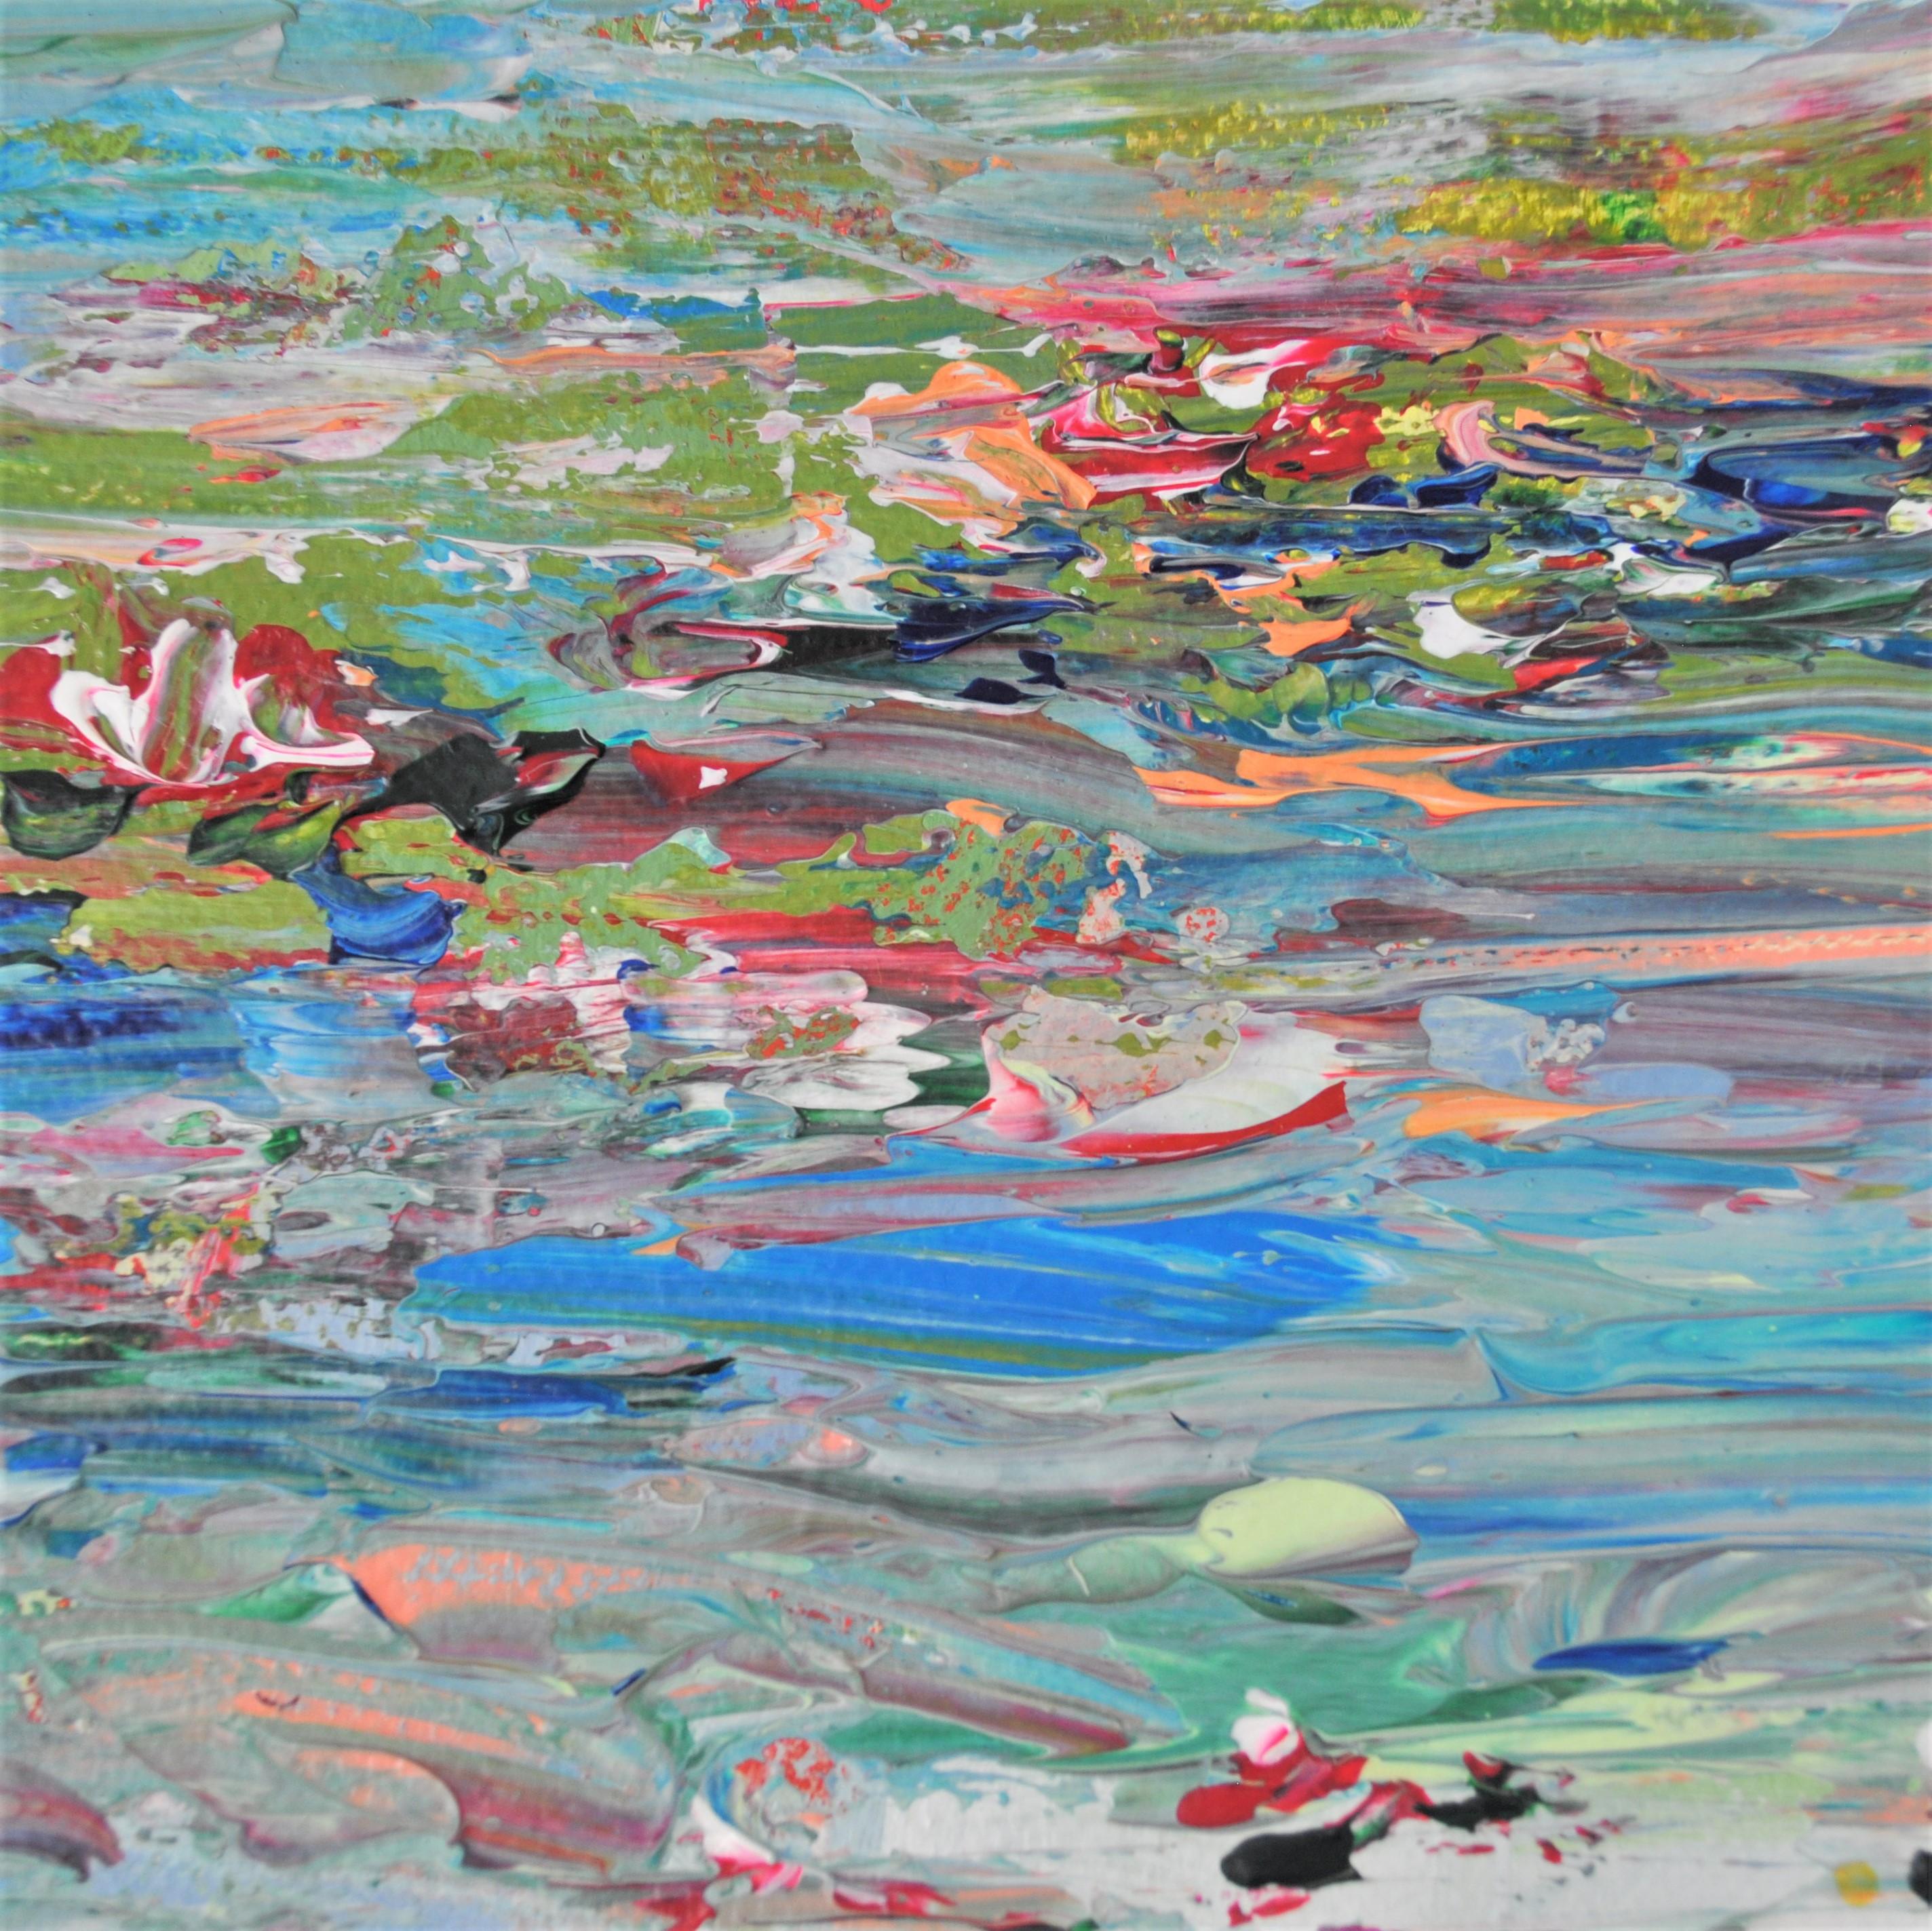 Diane Whalley, The Summer Pond, Abstract Art, Affordable Art, Art Online 2